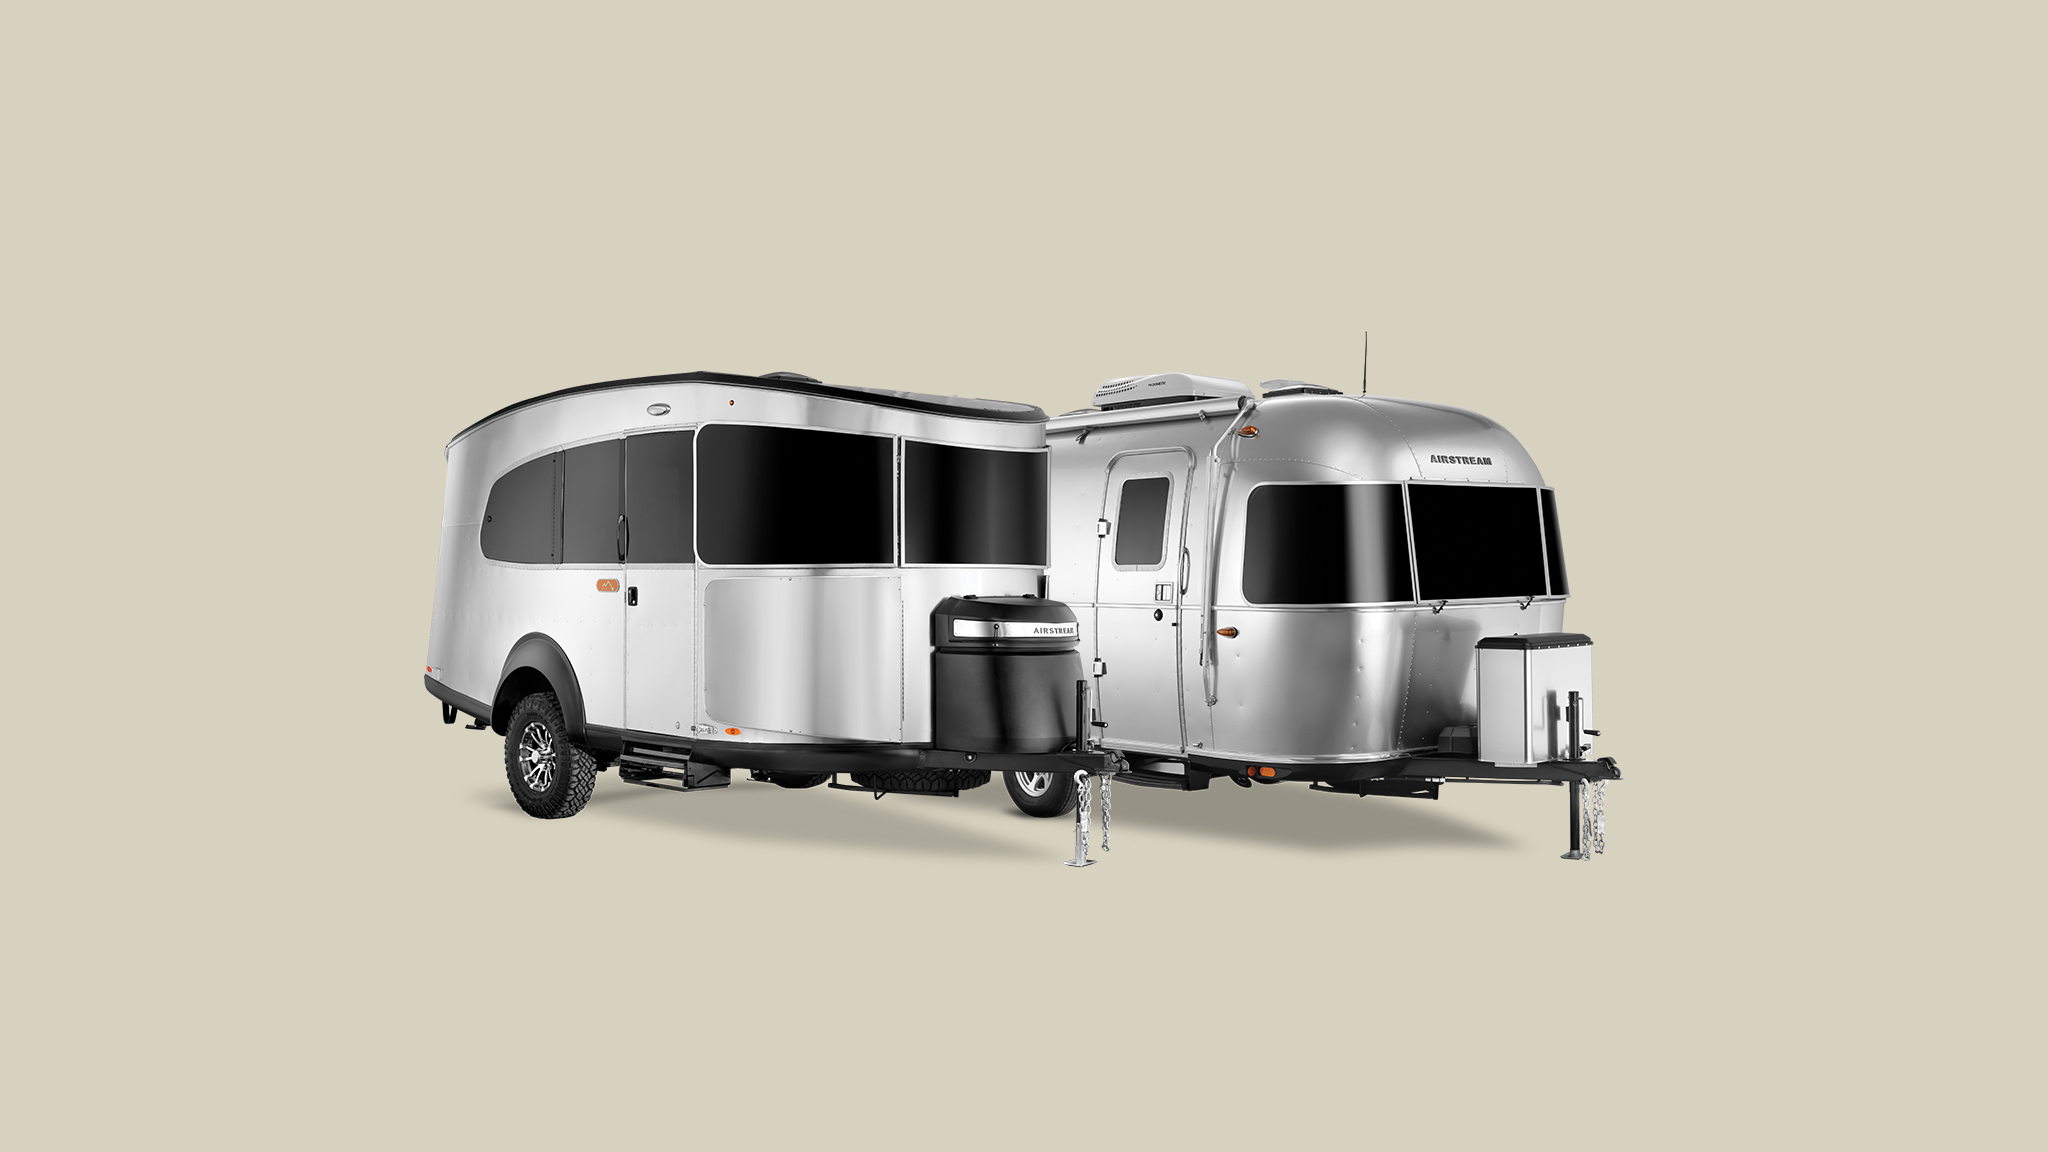 2023 Living Vehicle Luxury RV Trailer Can Make Its Own Water